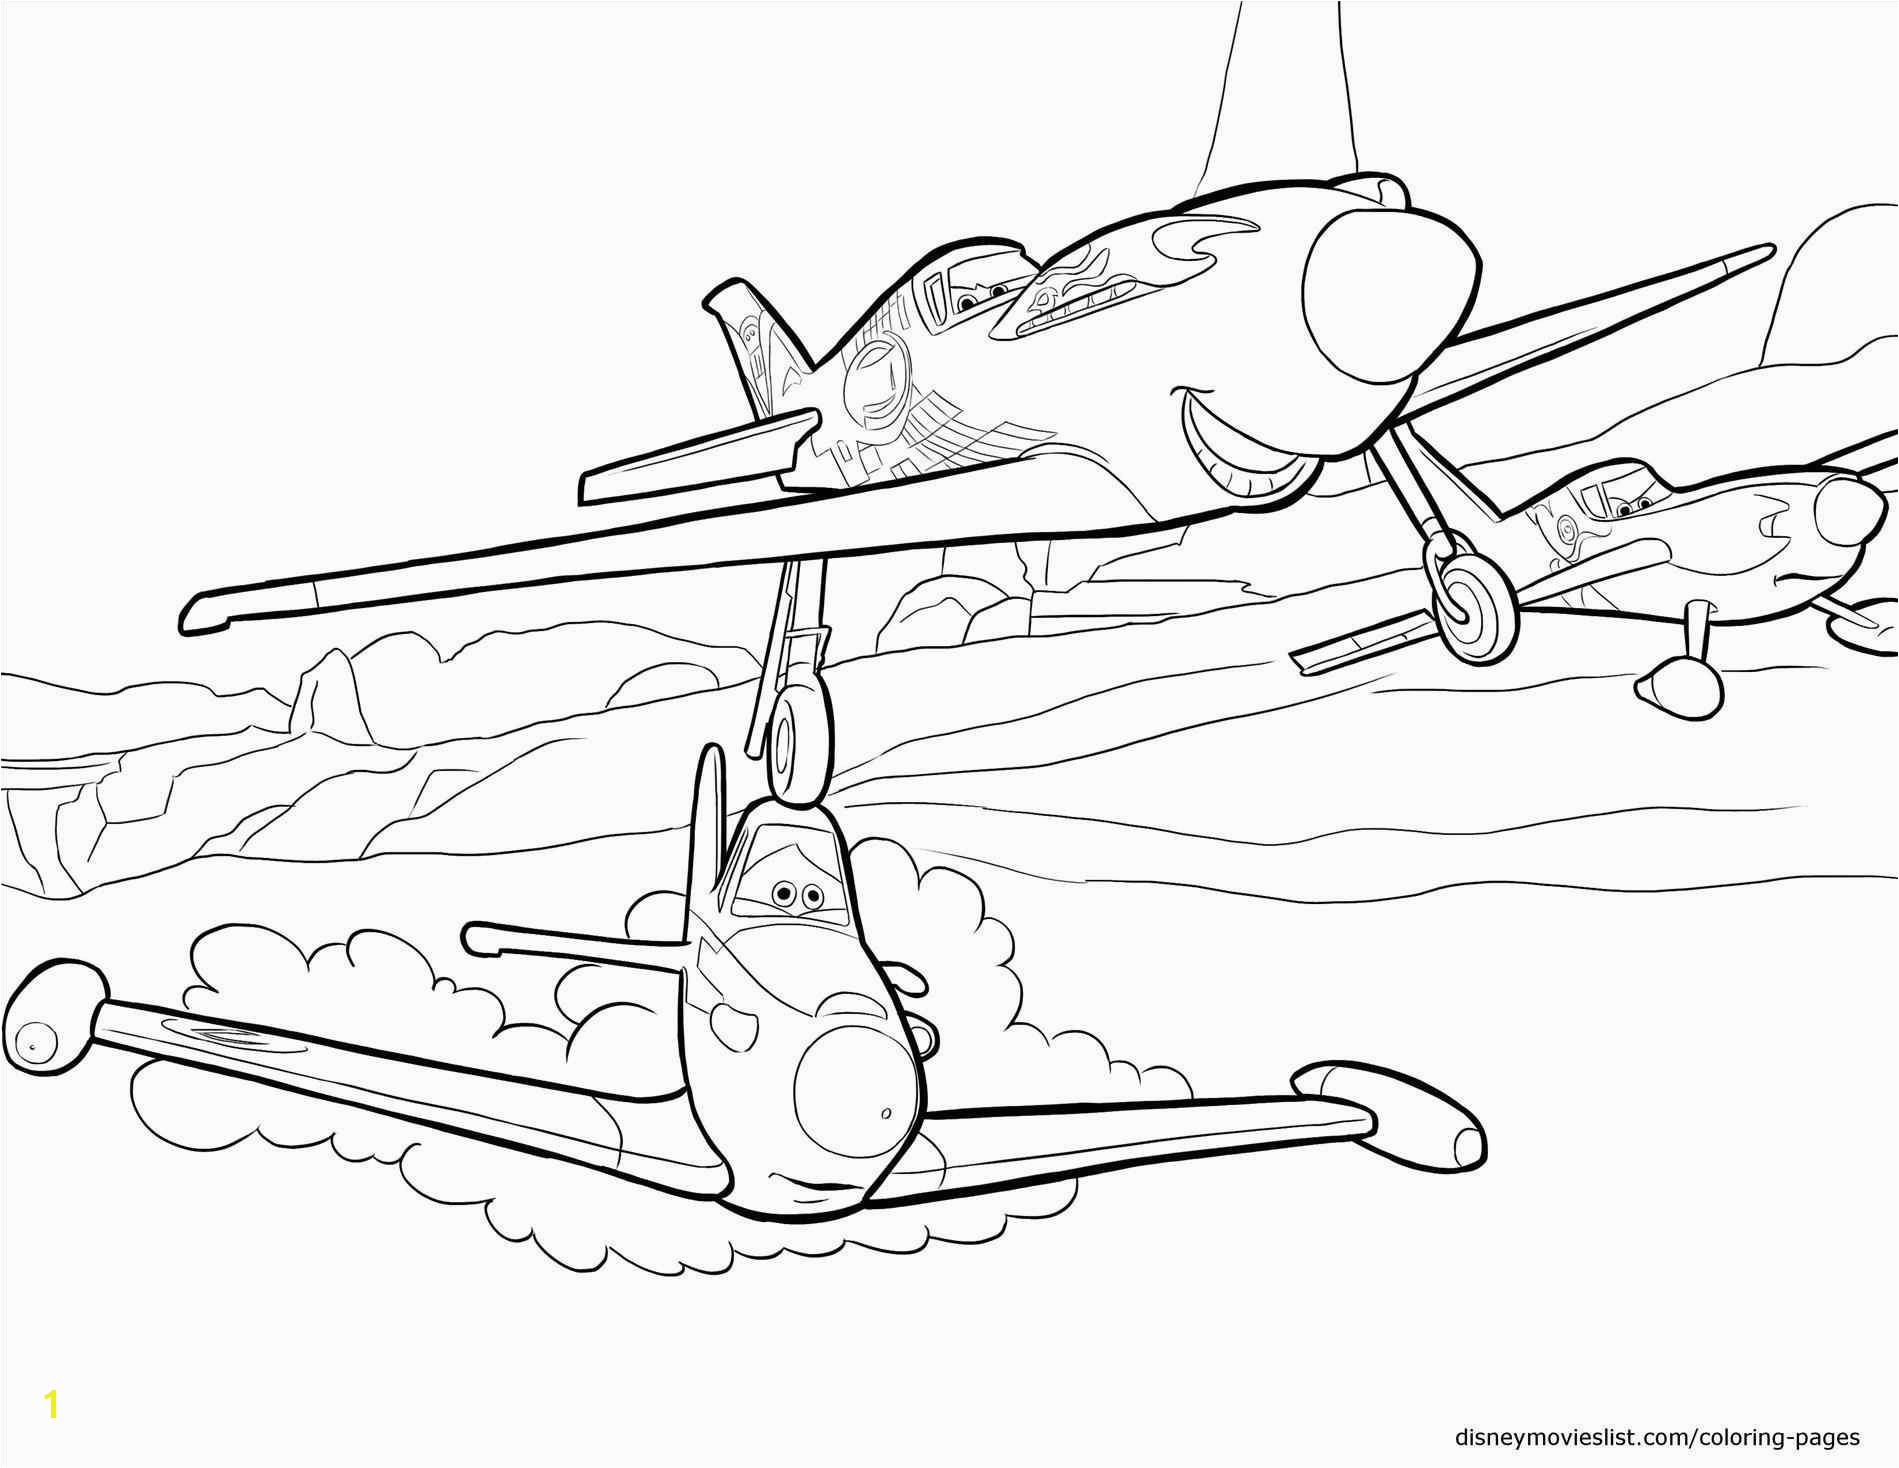 Airplane Coloring Pages to Print Aeroplanes Colouring Pages Planes Coloring Pages Plane Coloring